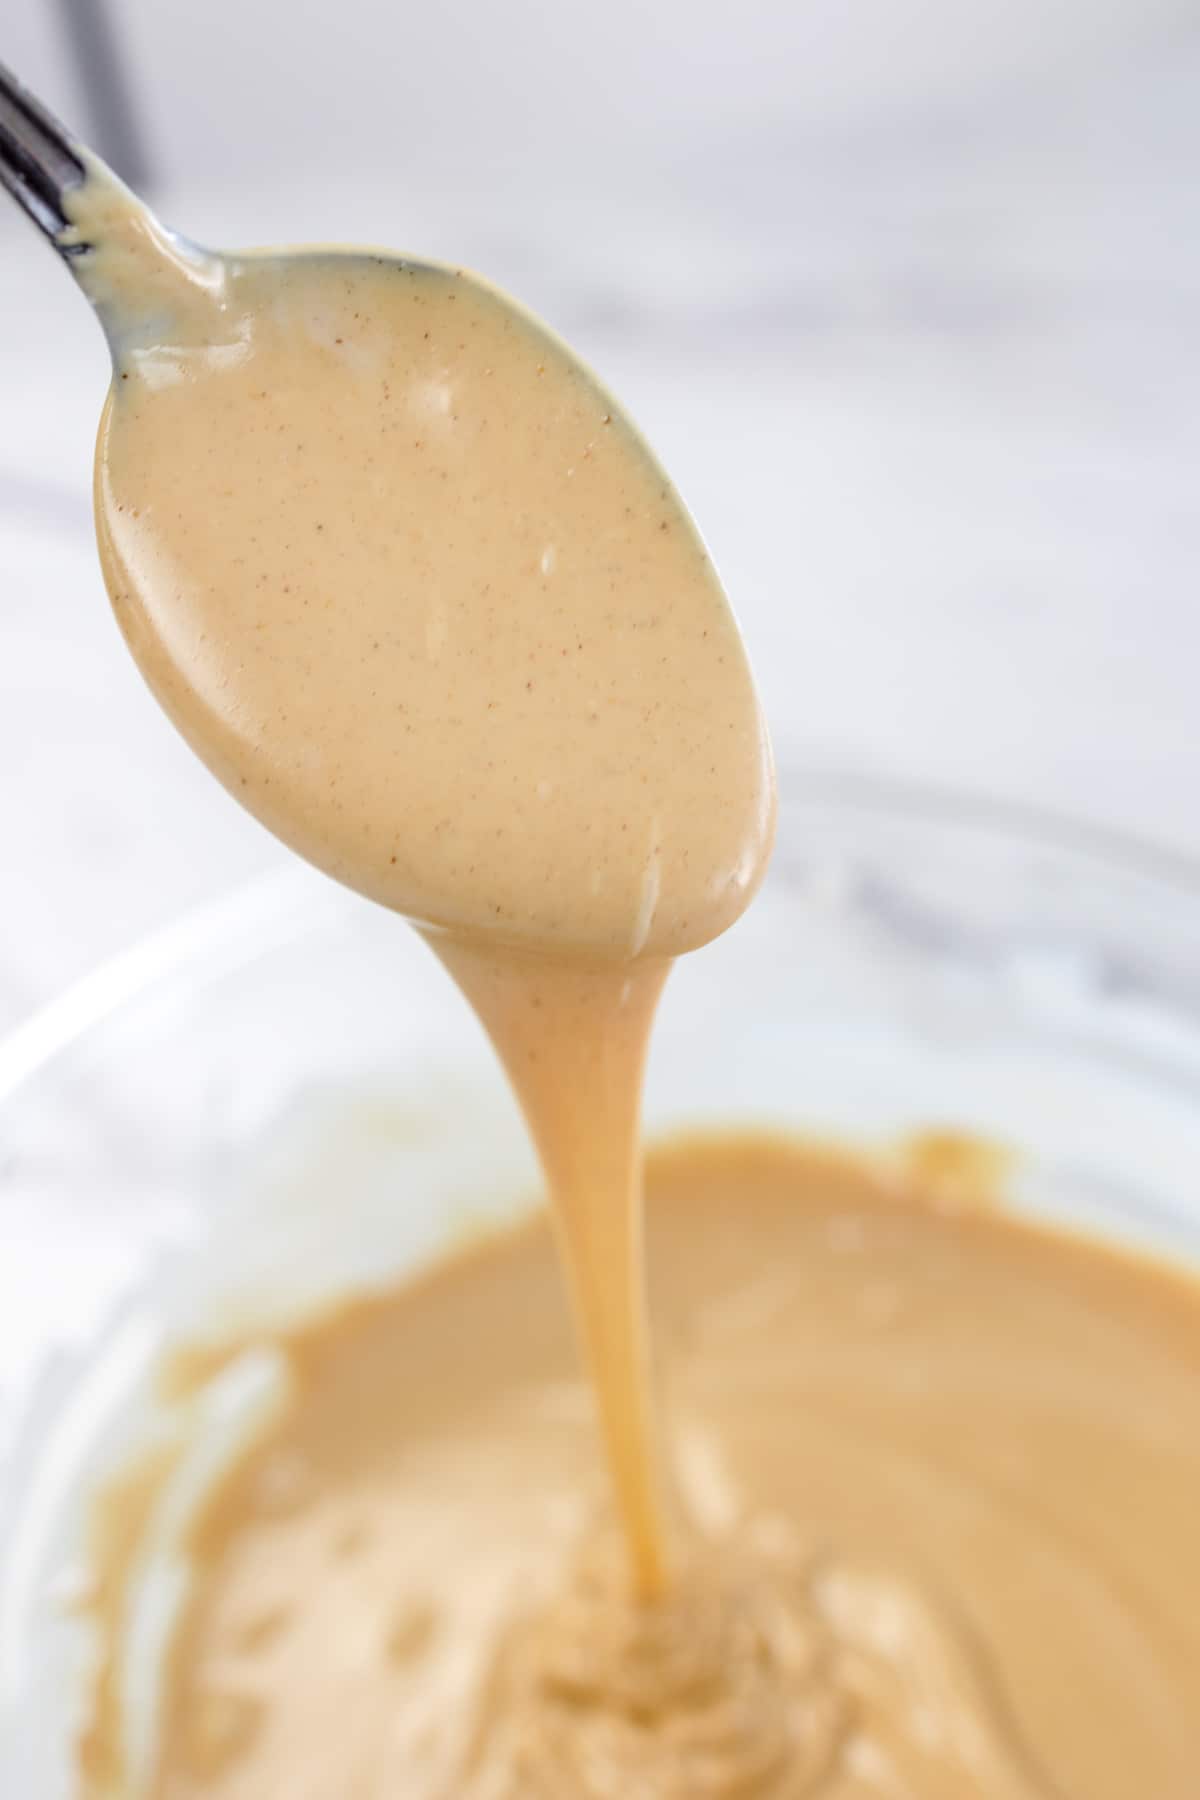 Close up of melted peanut butter and almond bark mixed together in a glass bowl, with a spoon lifting some out so that it is running off the spoon back into the bowl.